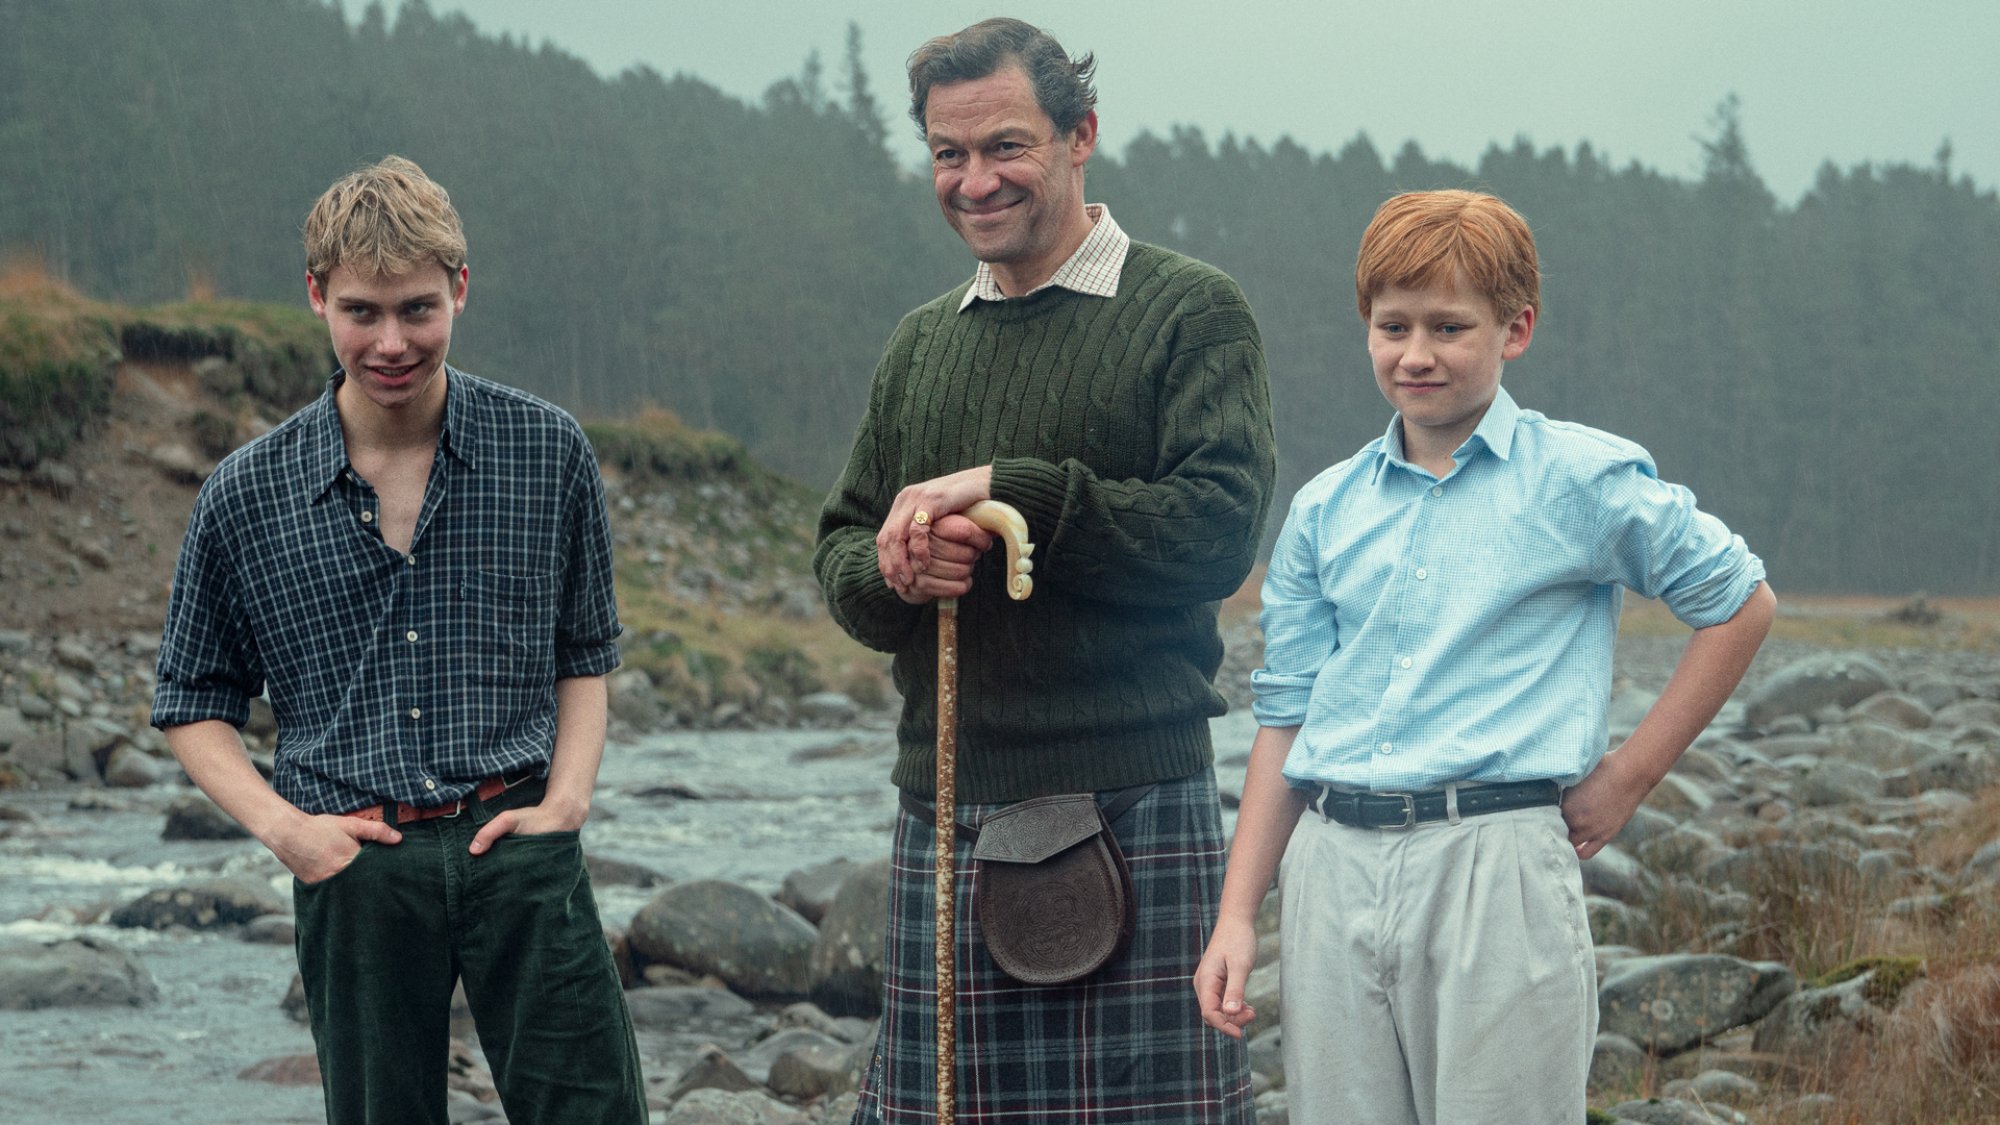 Prince William (Ed McVey), Prince Charles (Dominic West), and Prince Harry (Luther Ford) pose for a photo in the country.